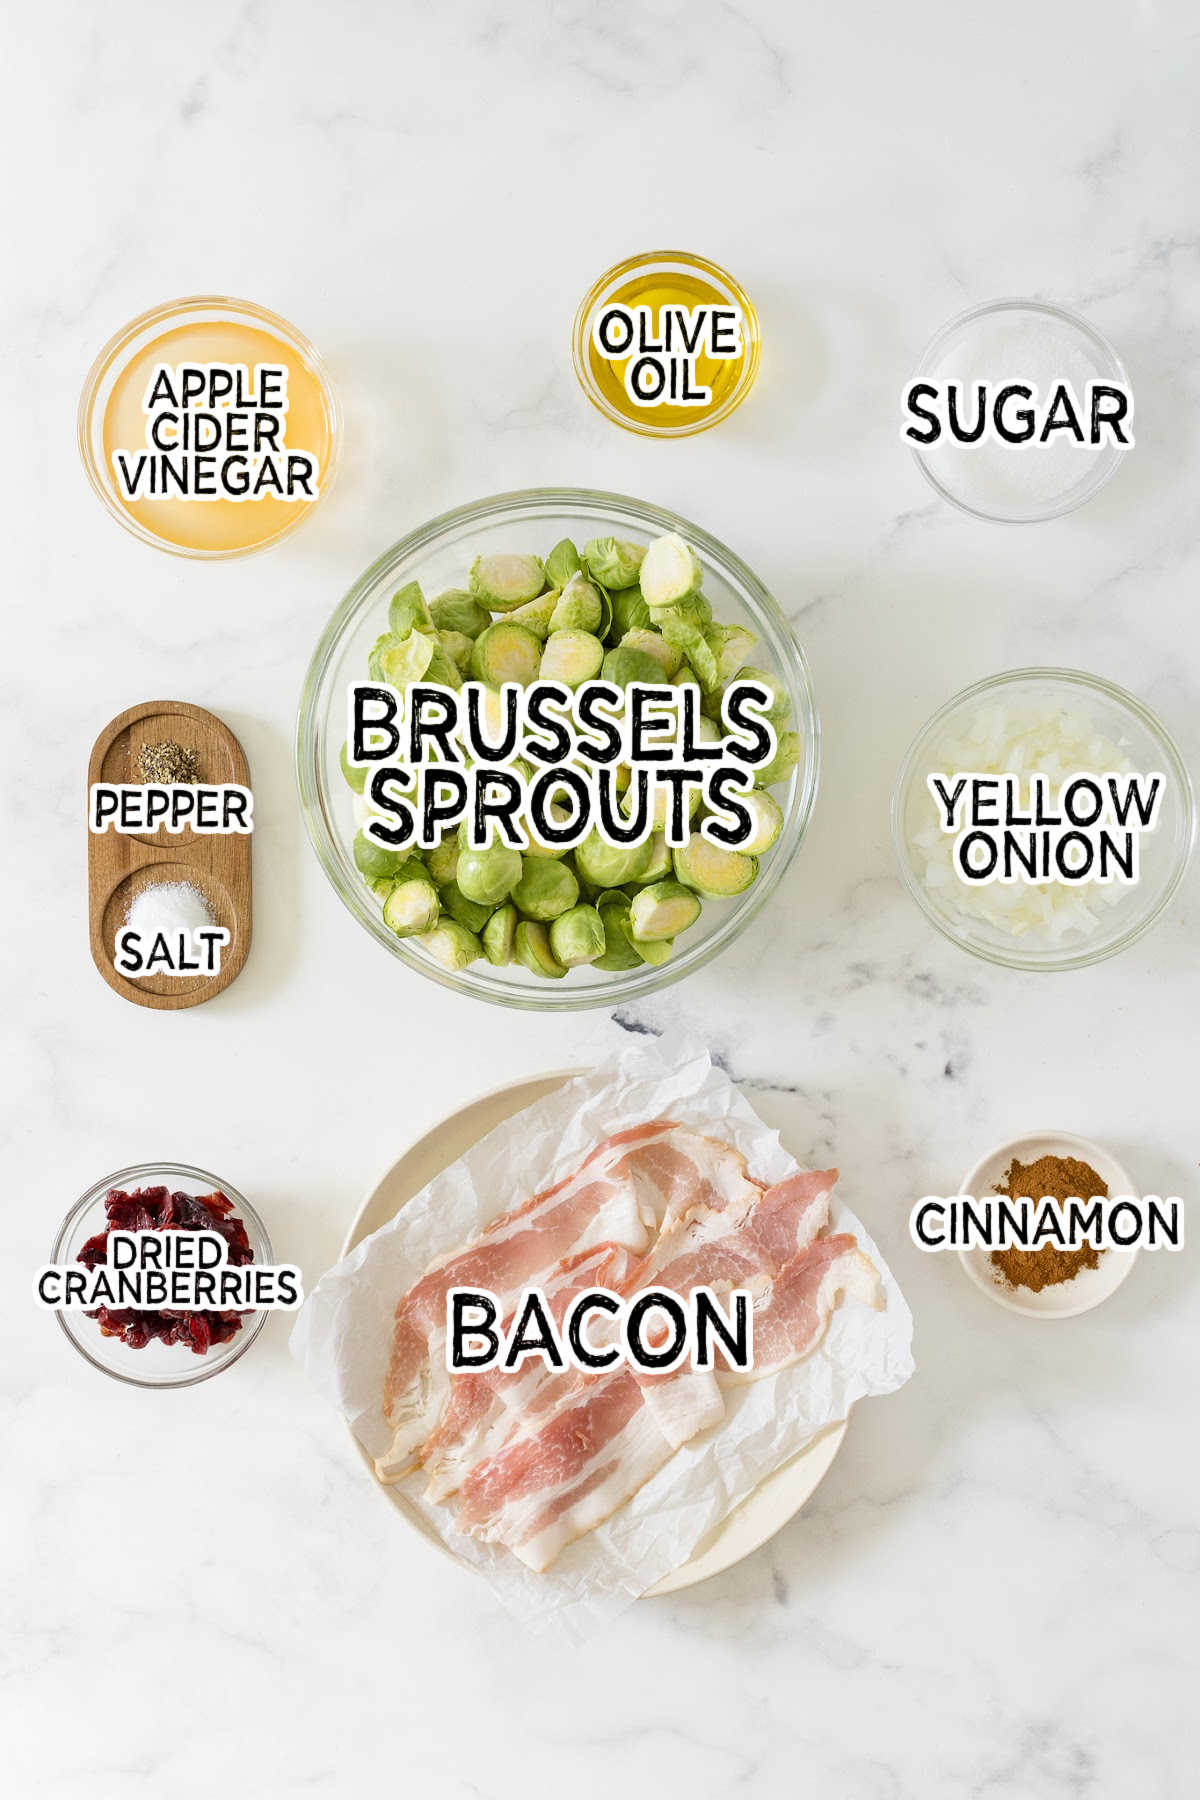 Ingredients to make roasted brussel sprouts with cranberries and bacon.